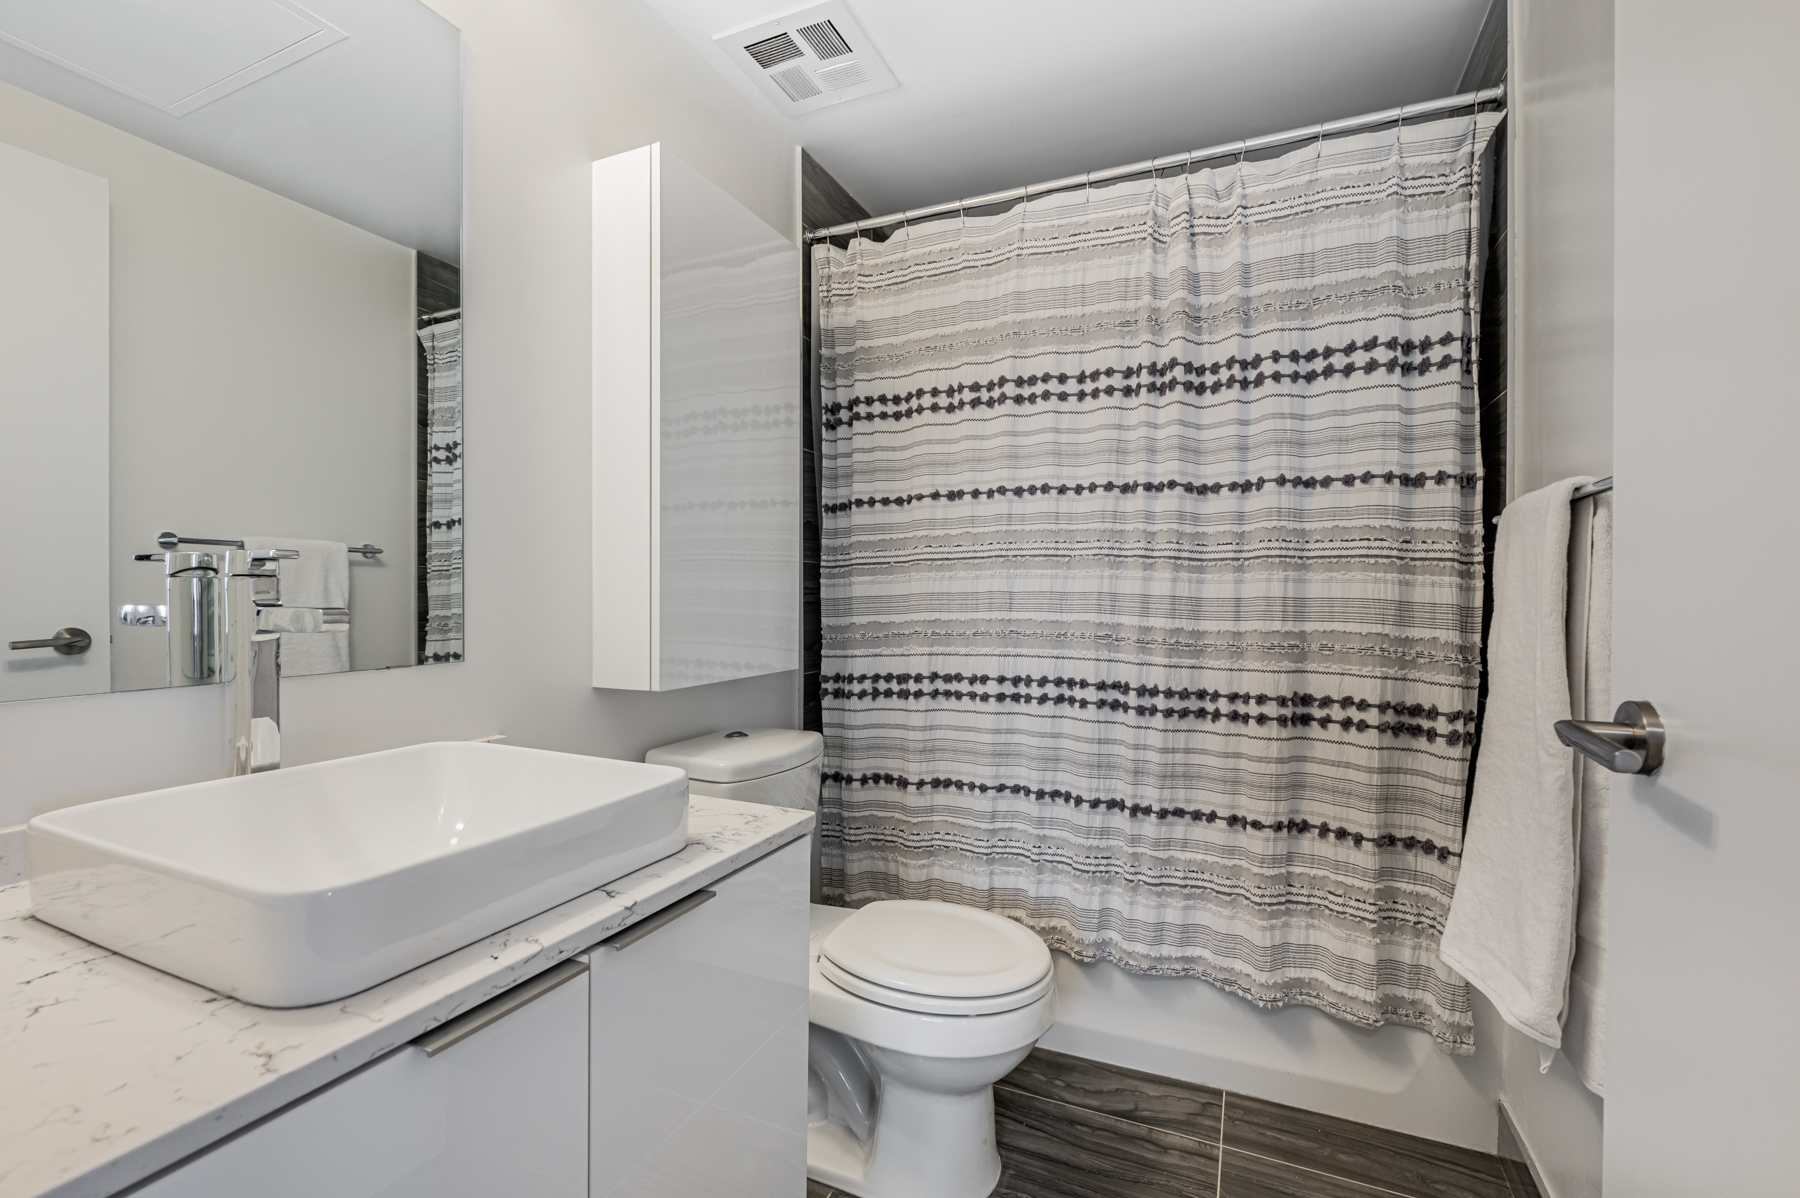 Condo bath with quartz counters, raised basin, cabinet, and soaker tub – 11 Wellesley St Unit 5808.